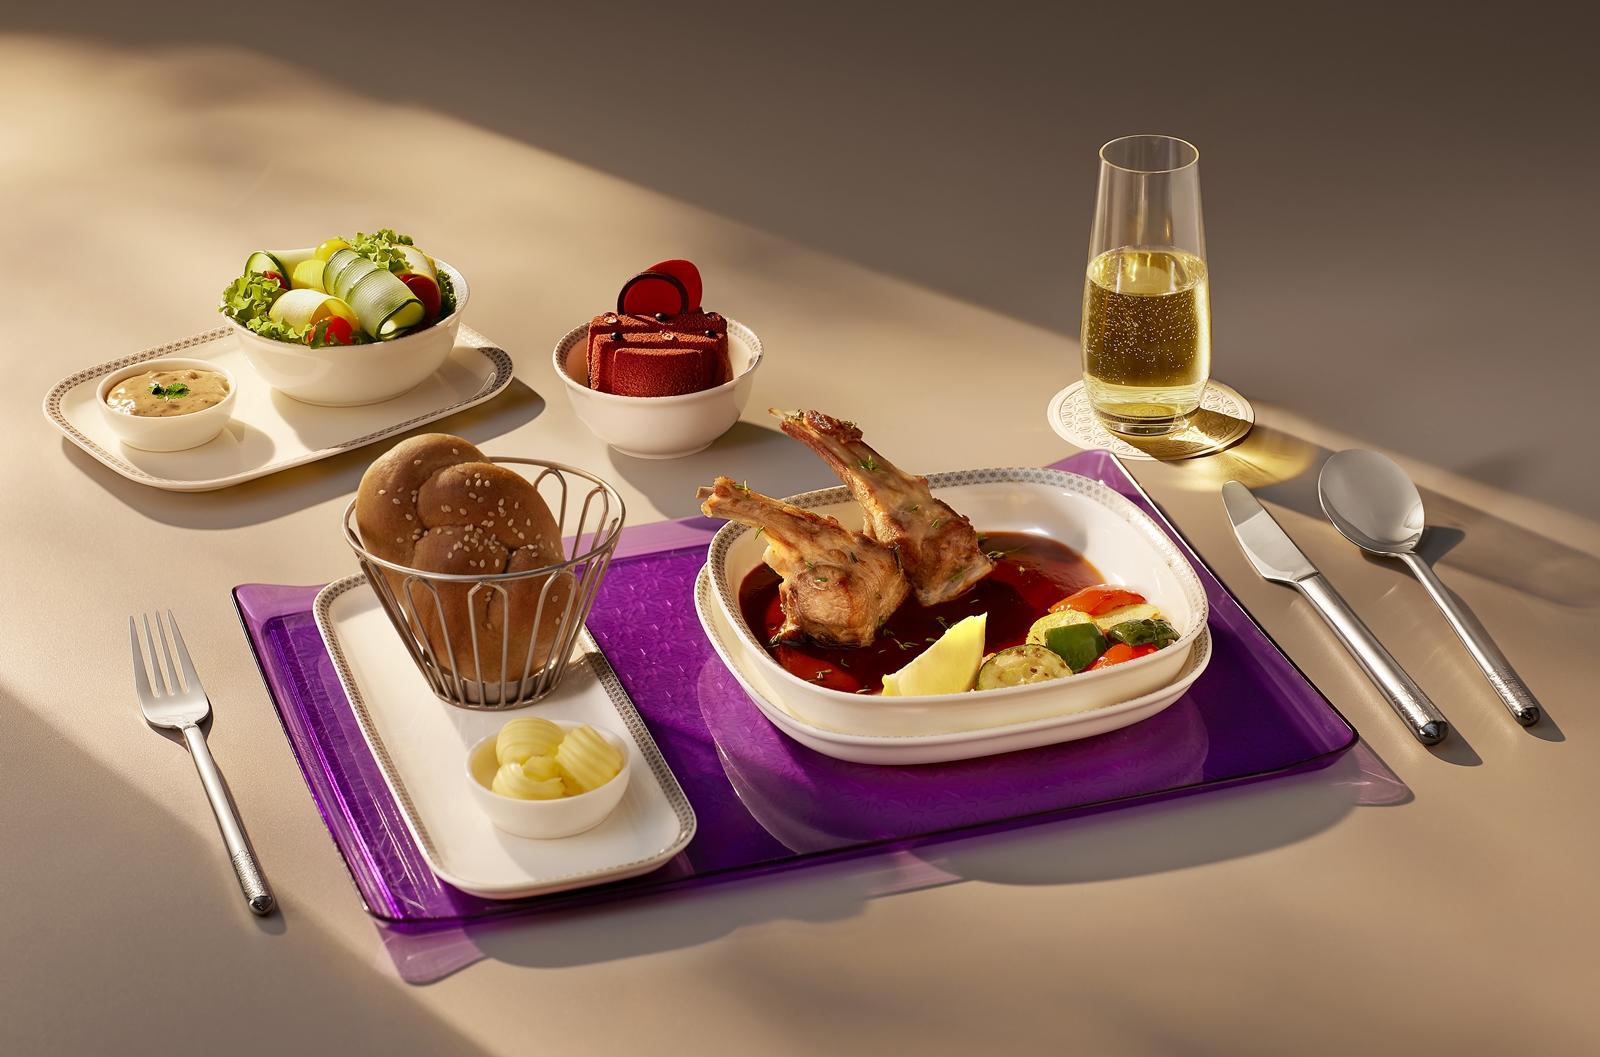 The airline has also introduced new bed linen, blankets, chinaware, and glassware and cutlery